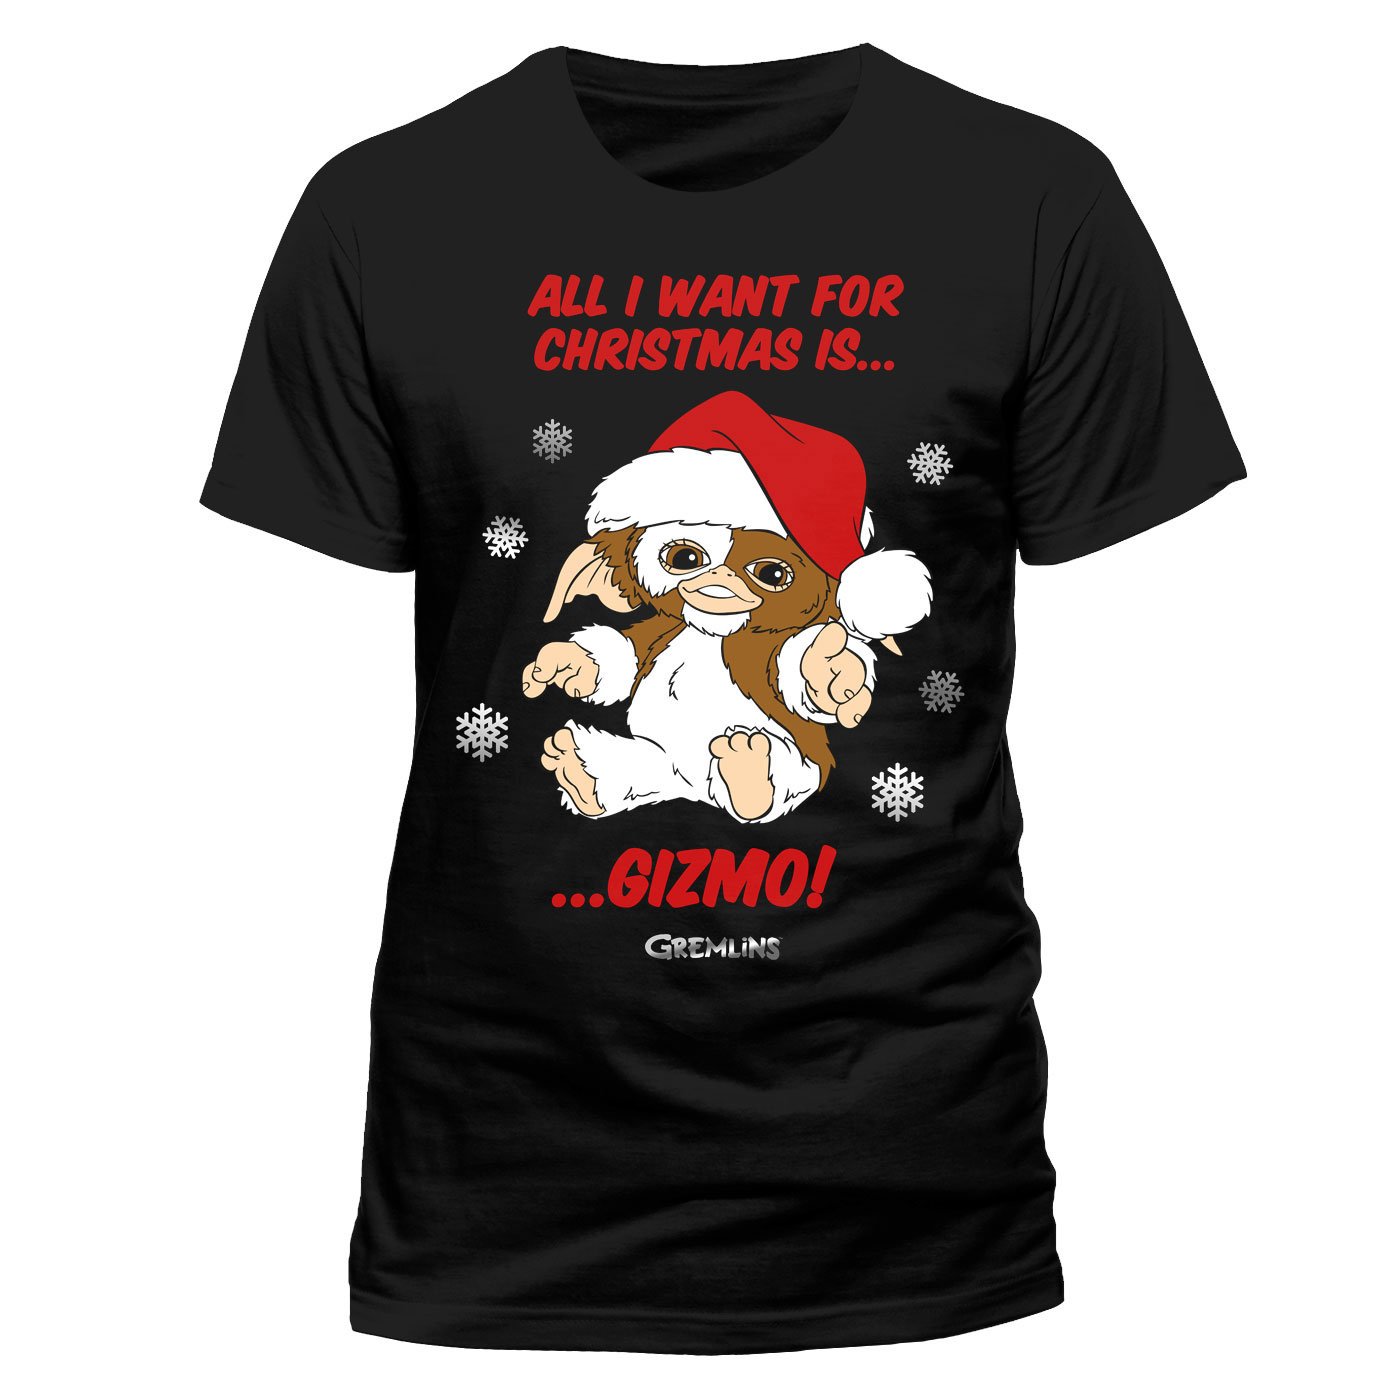 Gremlins T-Shirt All I Want Is Gizmo (XL)